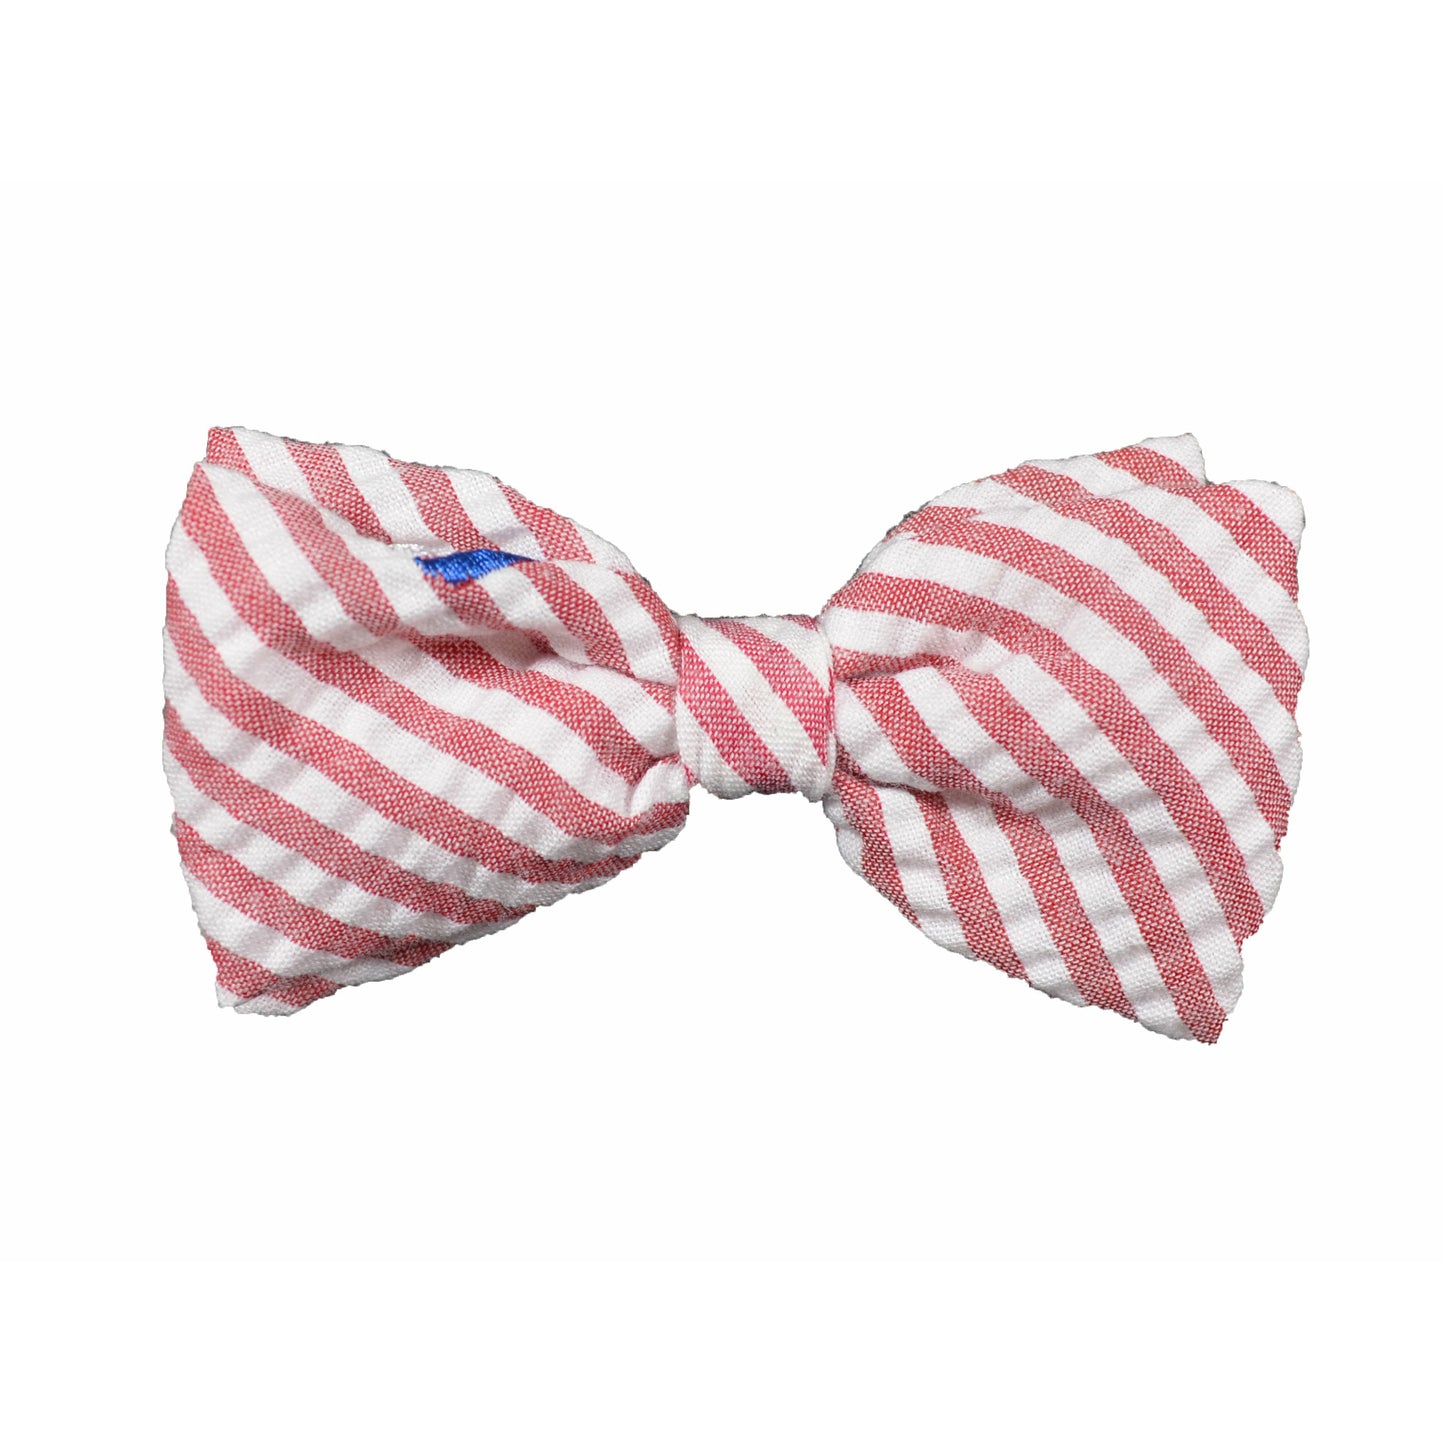 Red Stripe Sailboat Dog Bow Tie